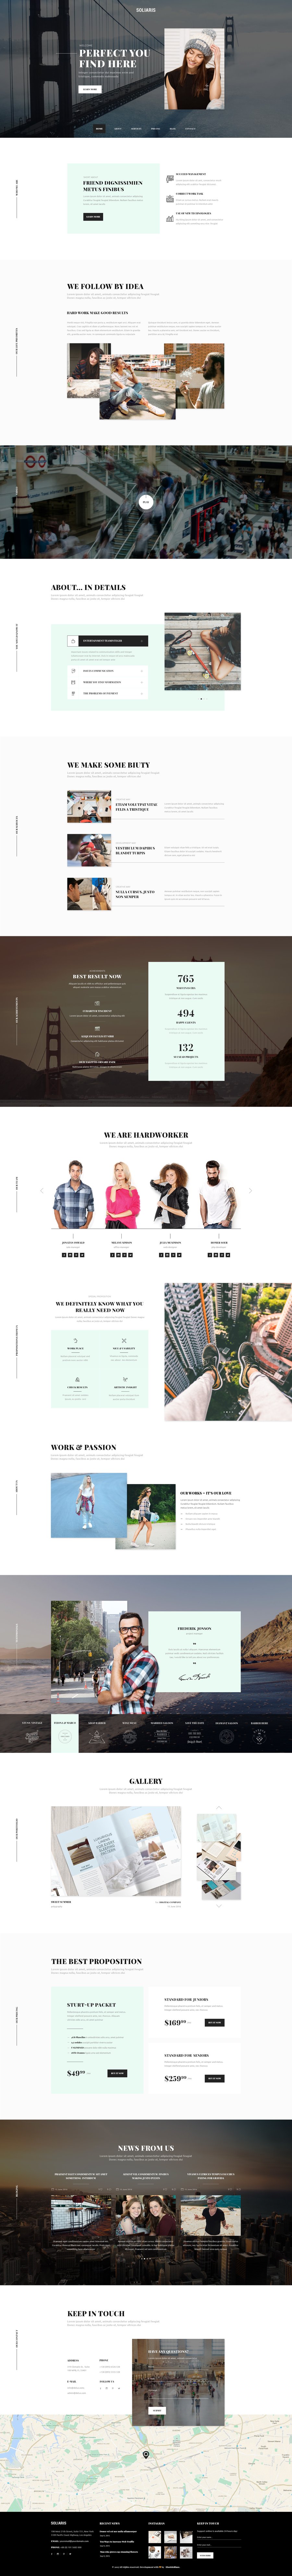 Soliaris - 18 One Page Bootstrap Templates - 7